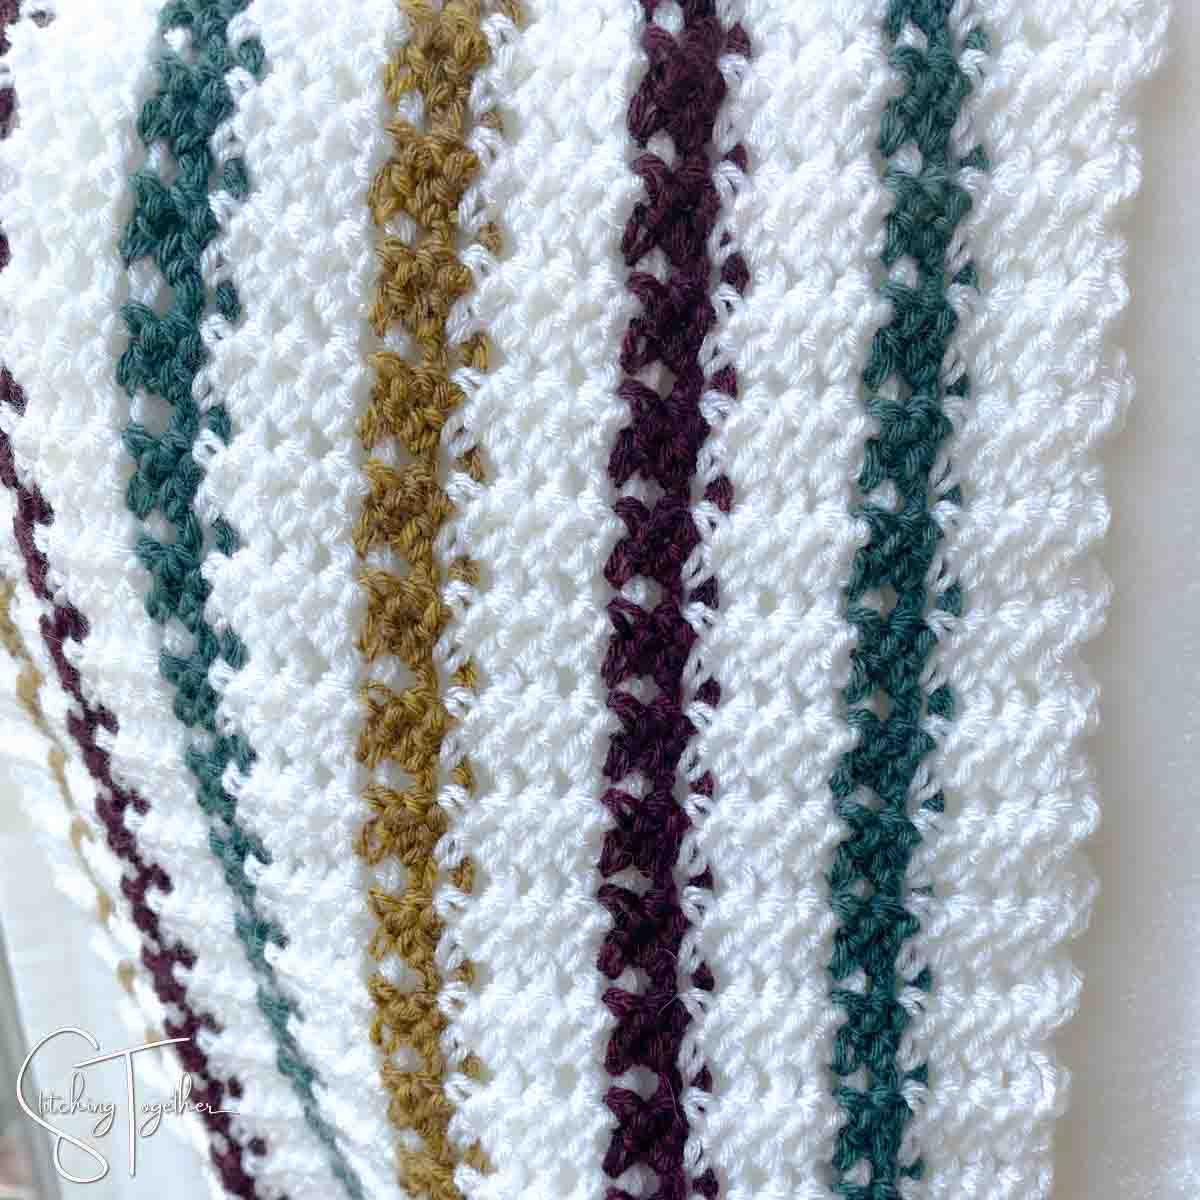 close up of striped lacy crochet stitches